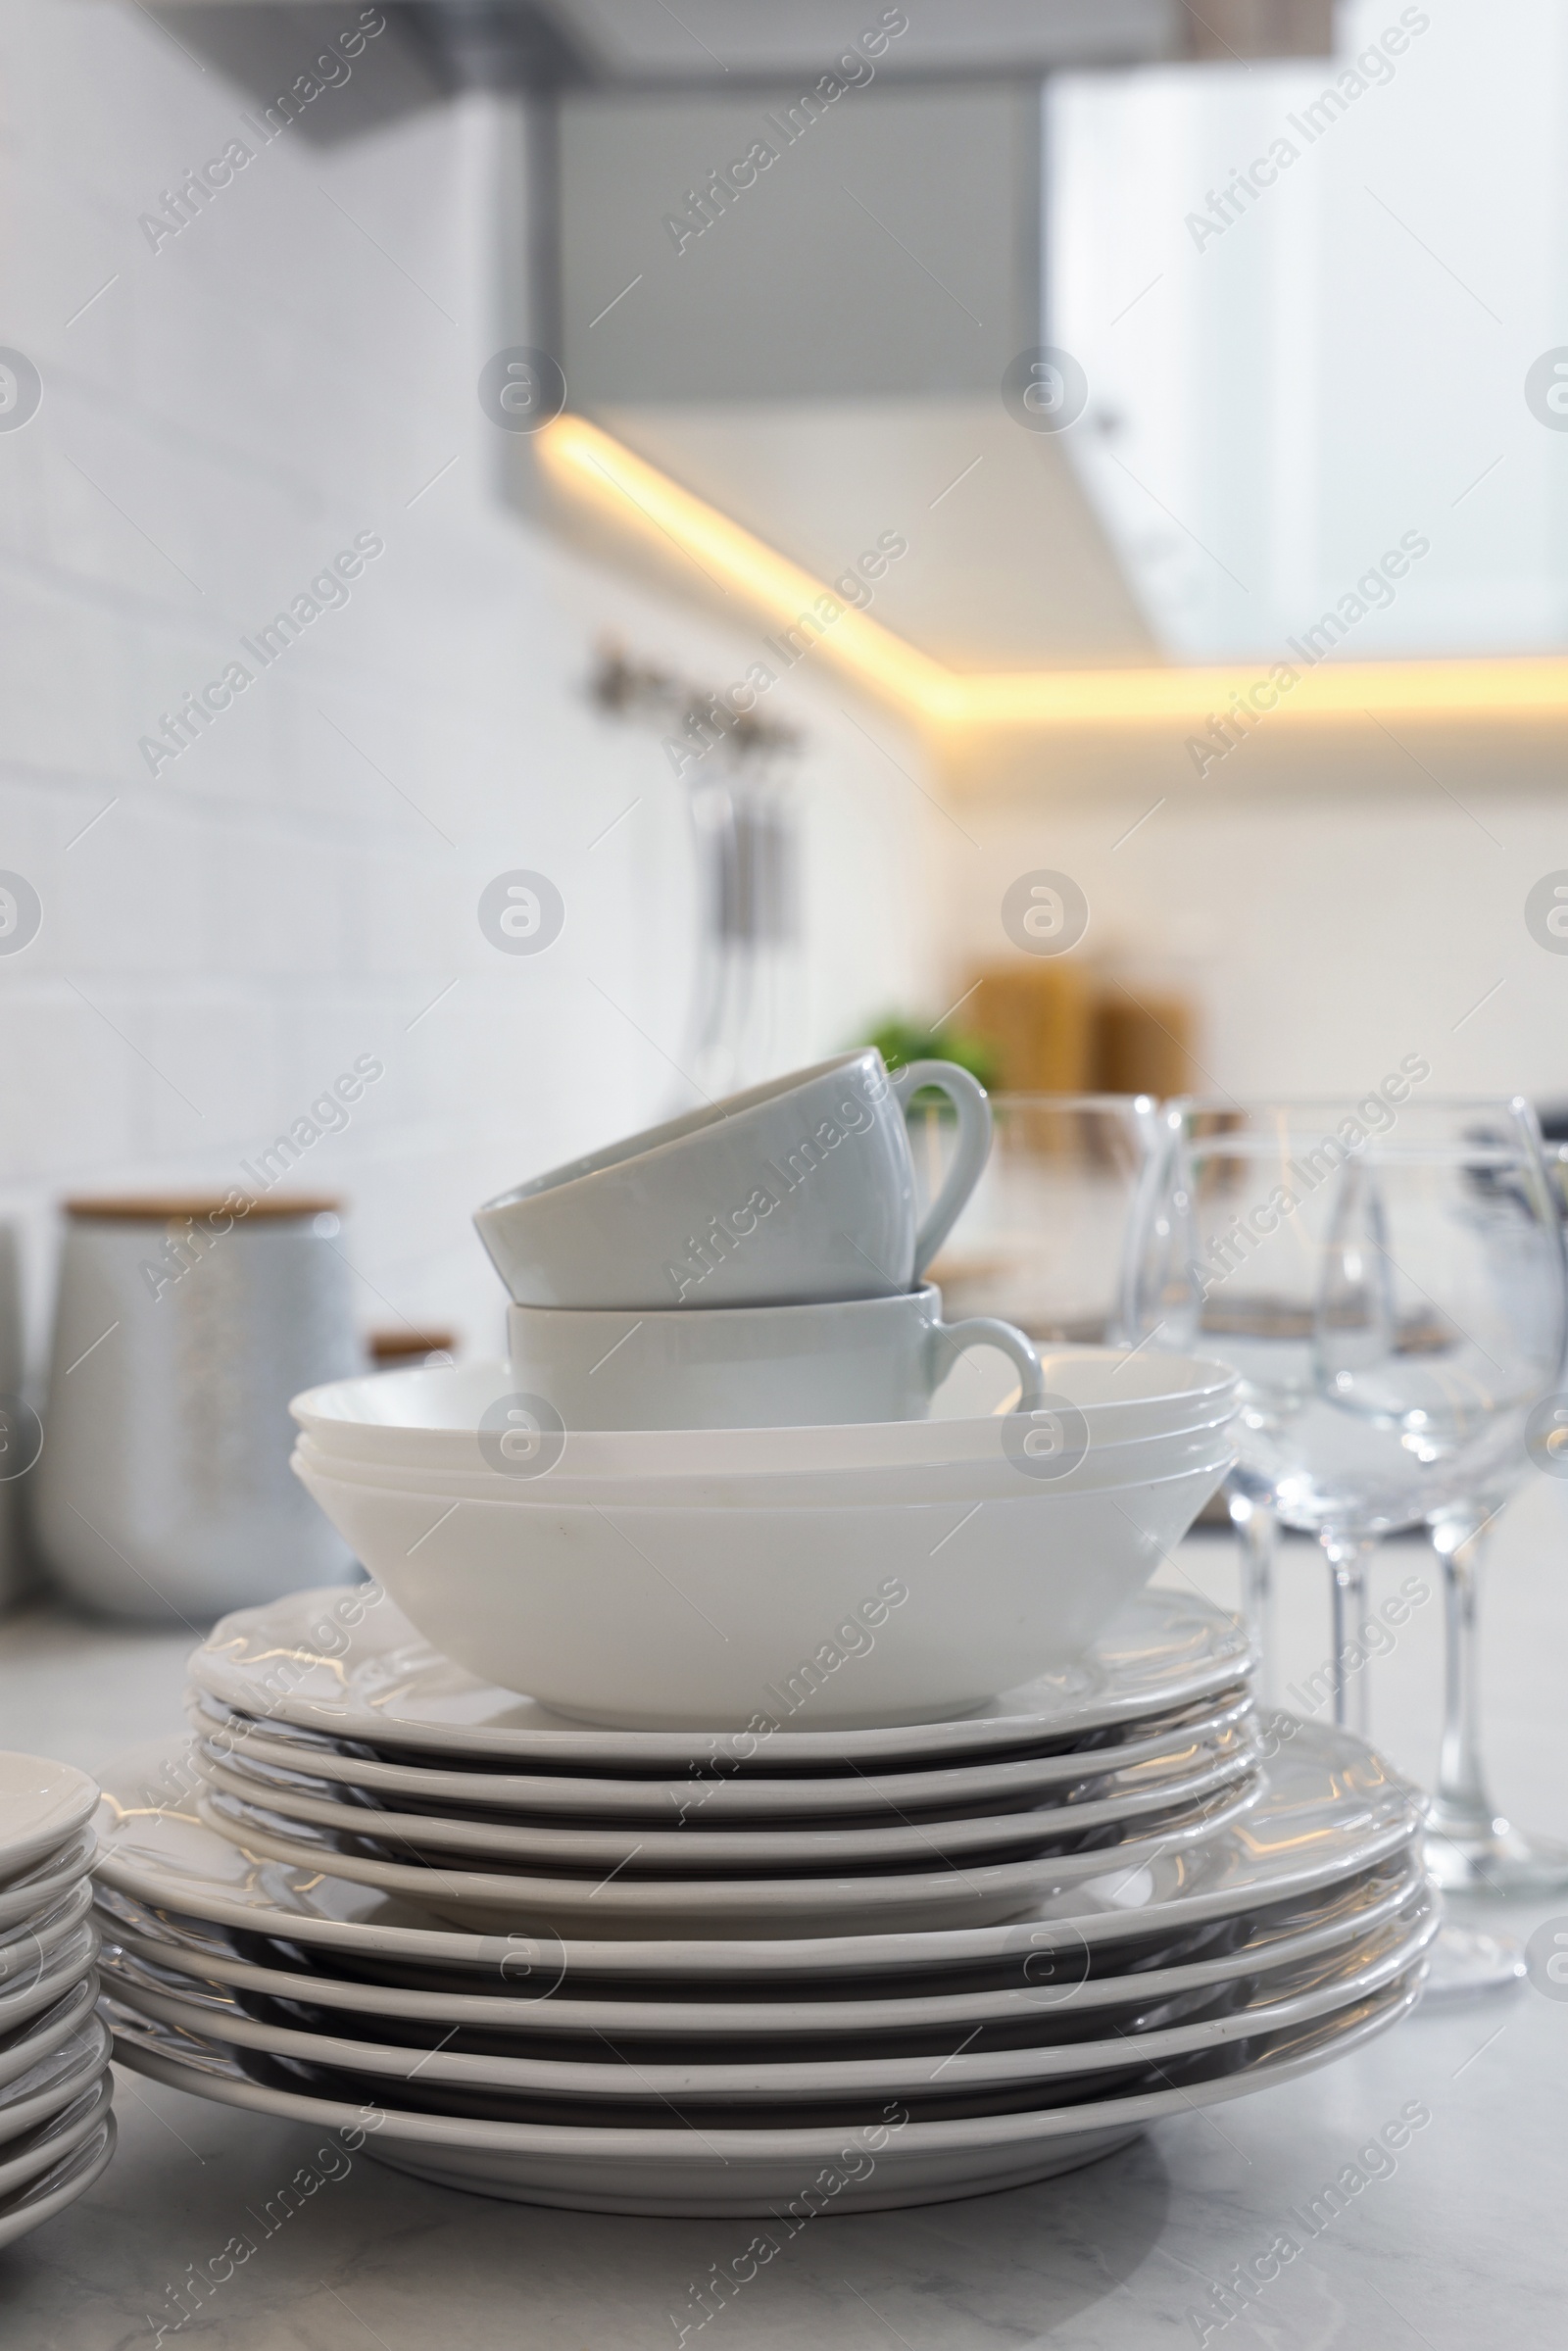 Photo of Different clean dishware, cups and glasses on countertop in kitchen